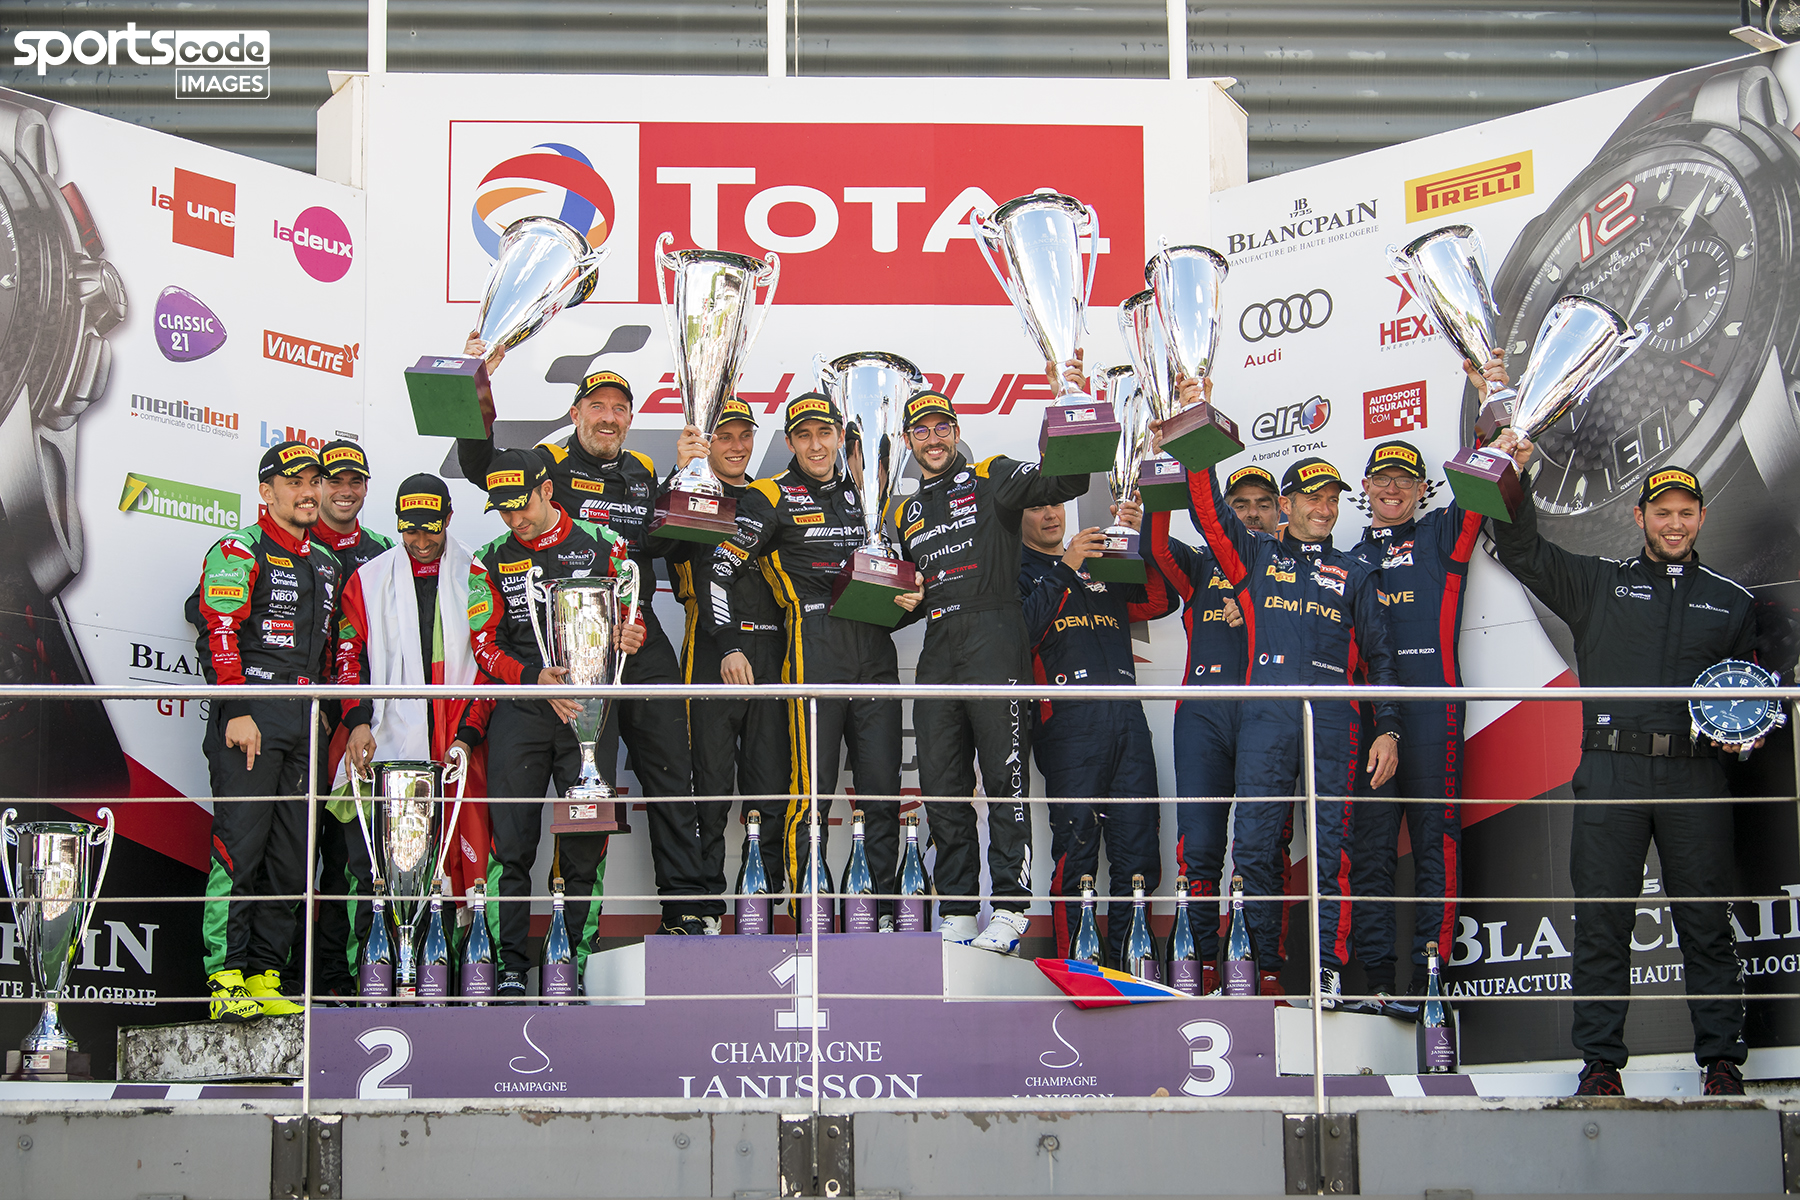 Victory for Miguel Toril at the 24 hours of Spa